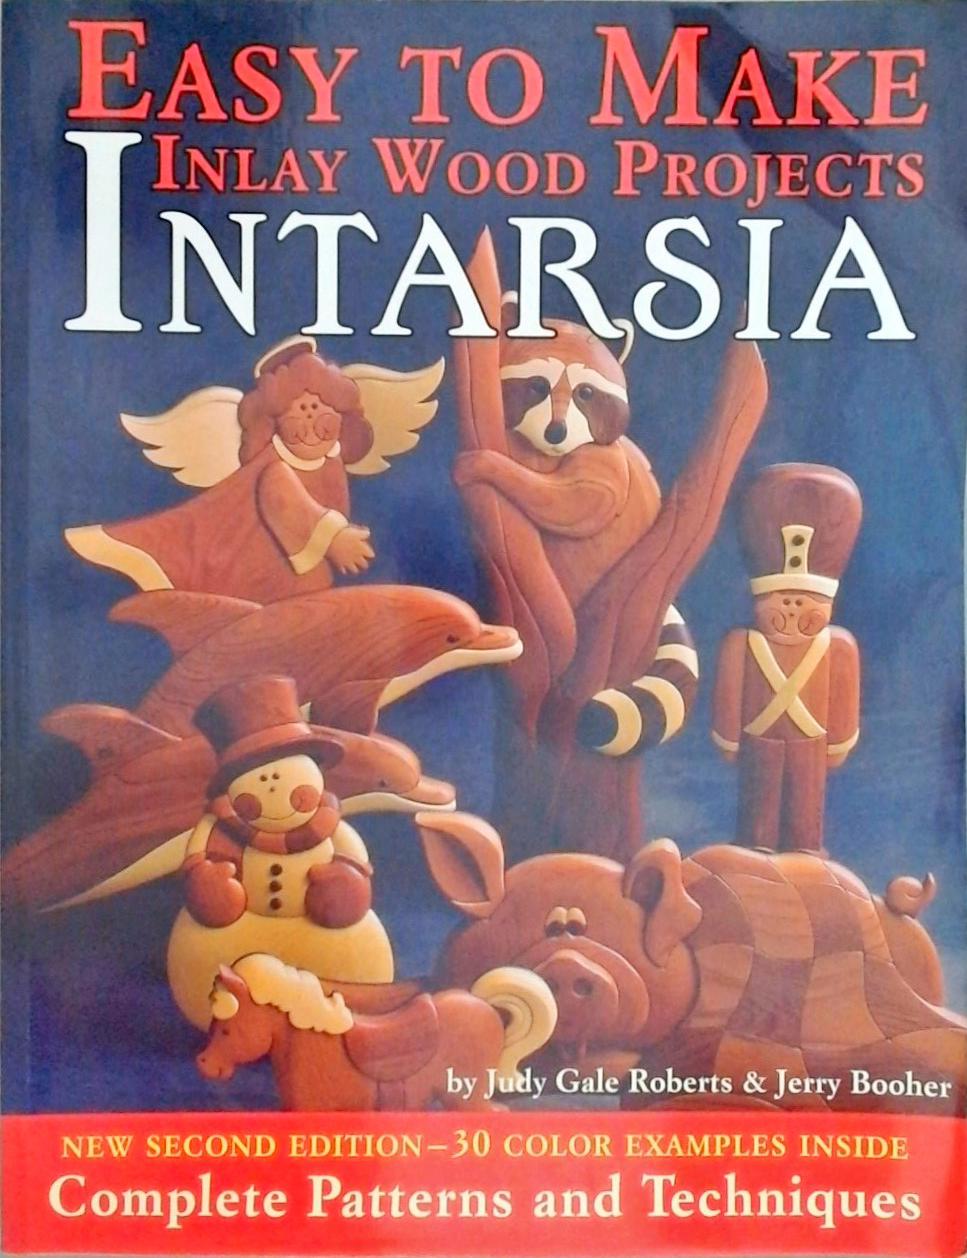 Easy To Make Inlay Wood Projects - Intarsia